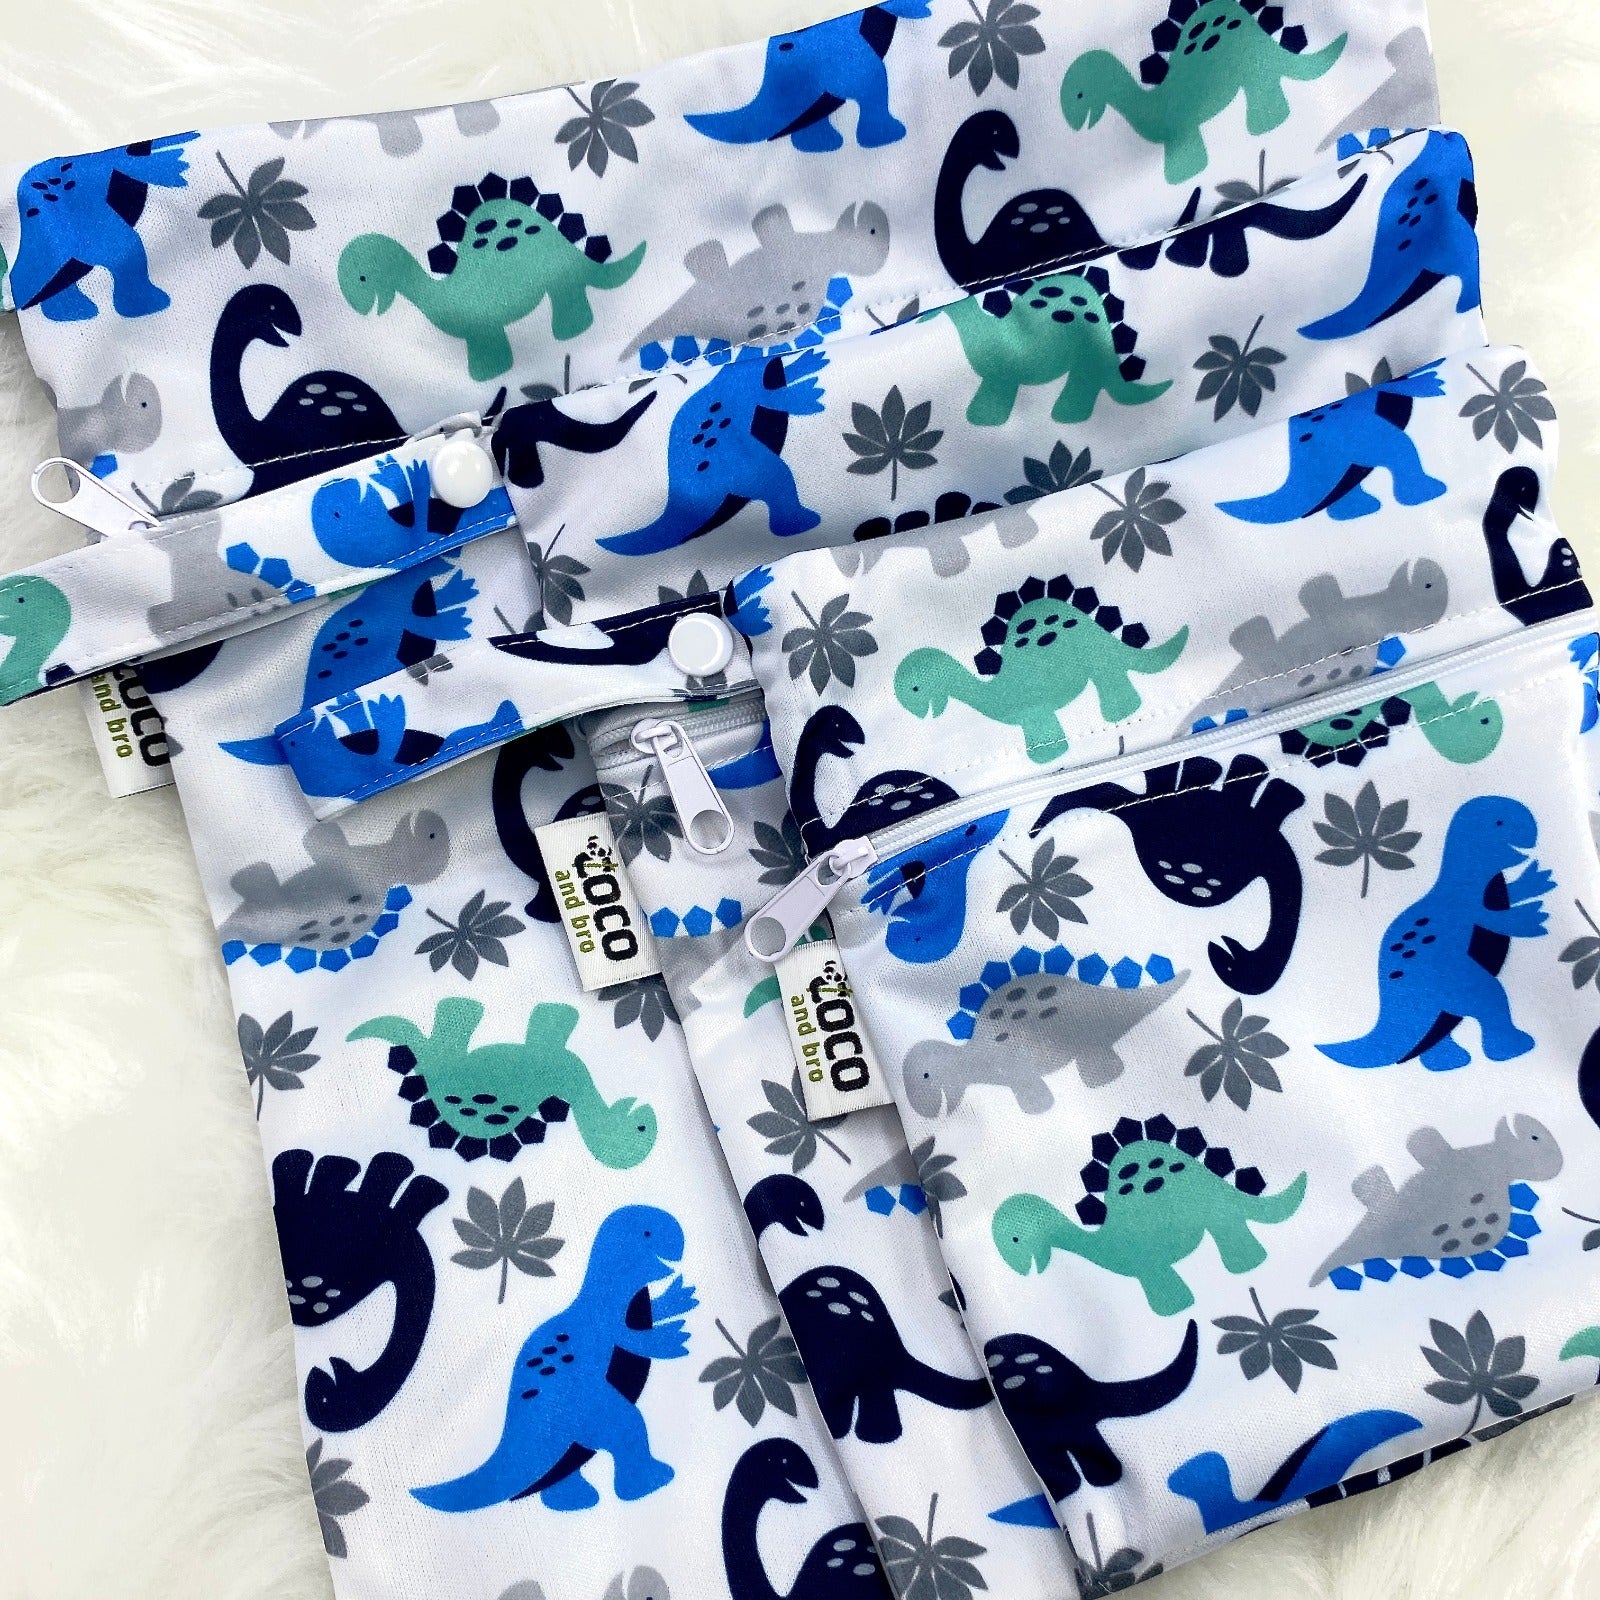 A set of three waterproof bags in a green and blue dinosaur design on a white background, made from bamboo and in three different sizes. Each bag has a zipper closure.